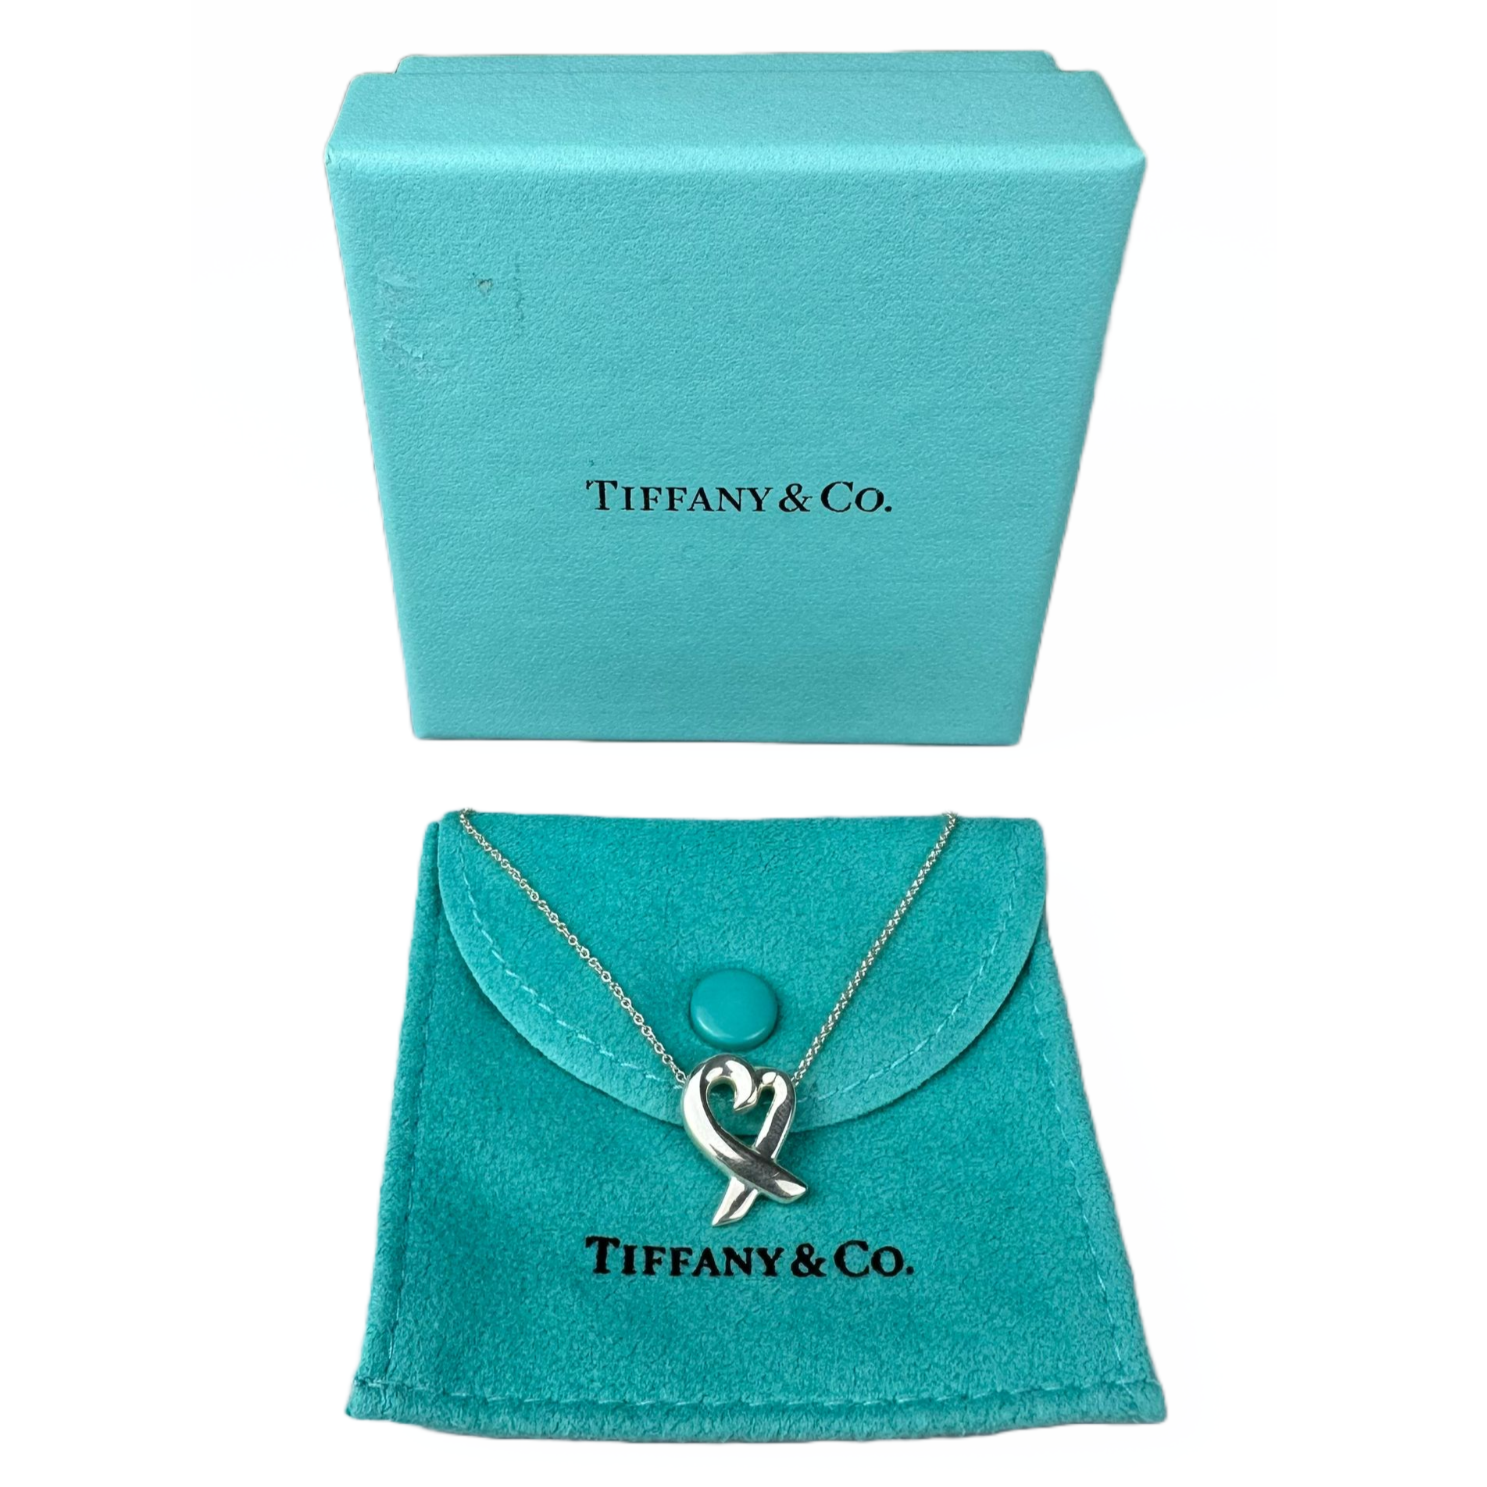 Tiffany & Co Paloma Picasso Loving Heart Pendant Necklace Sterling Silver